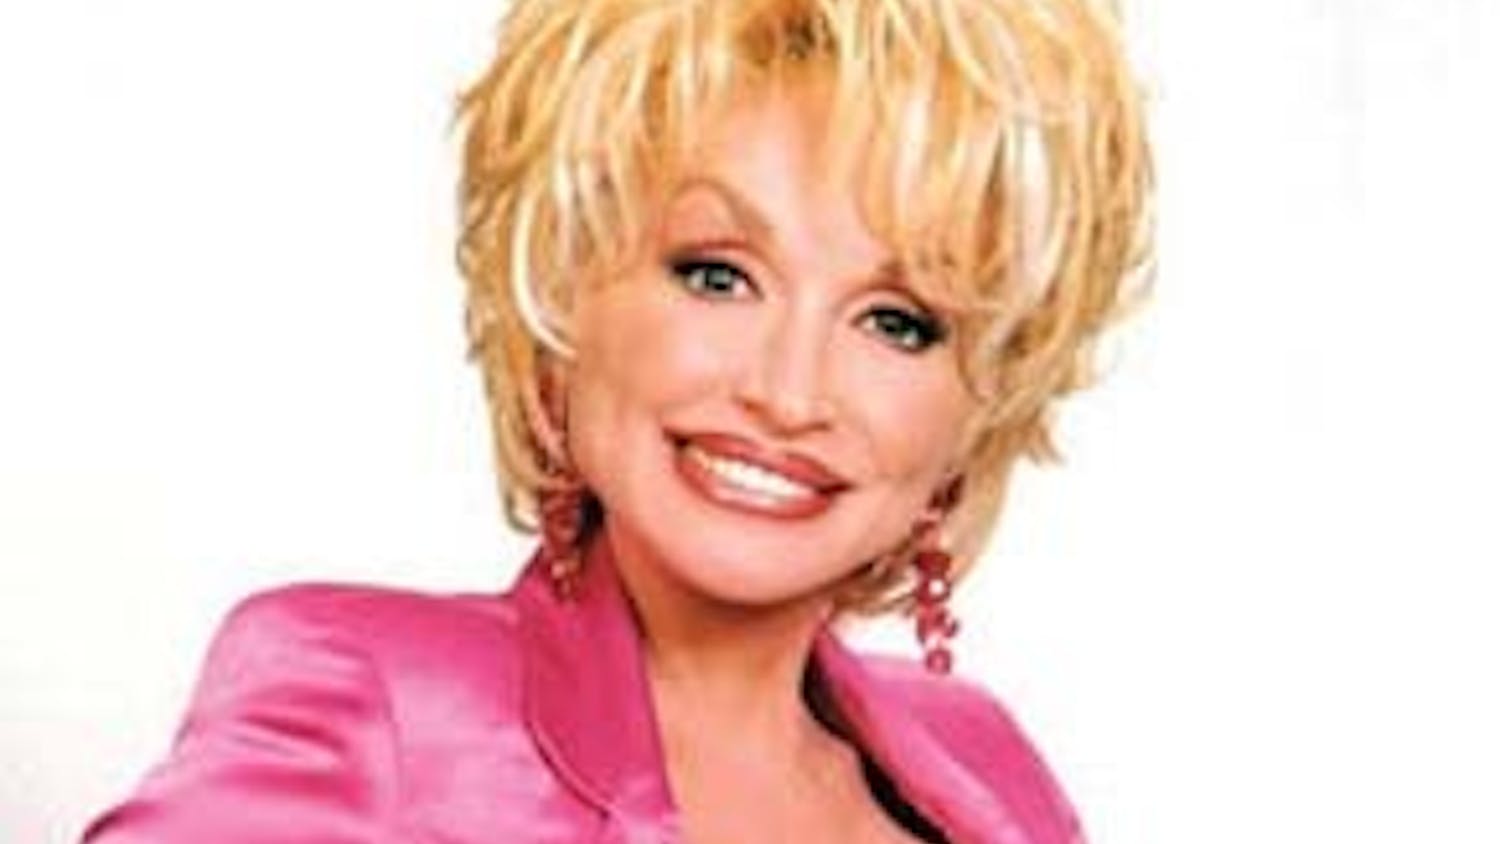 After all these years, Dolly Parton's still got huge... tracts of land.